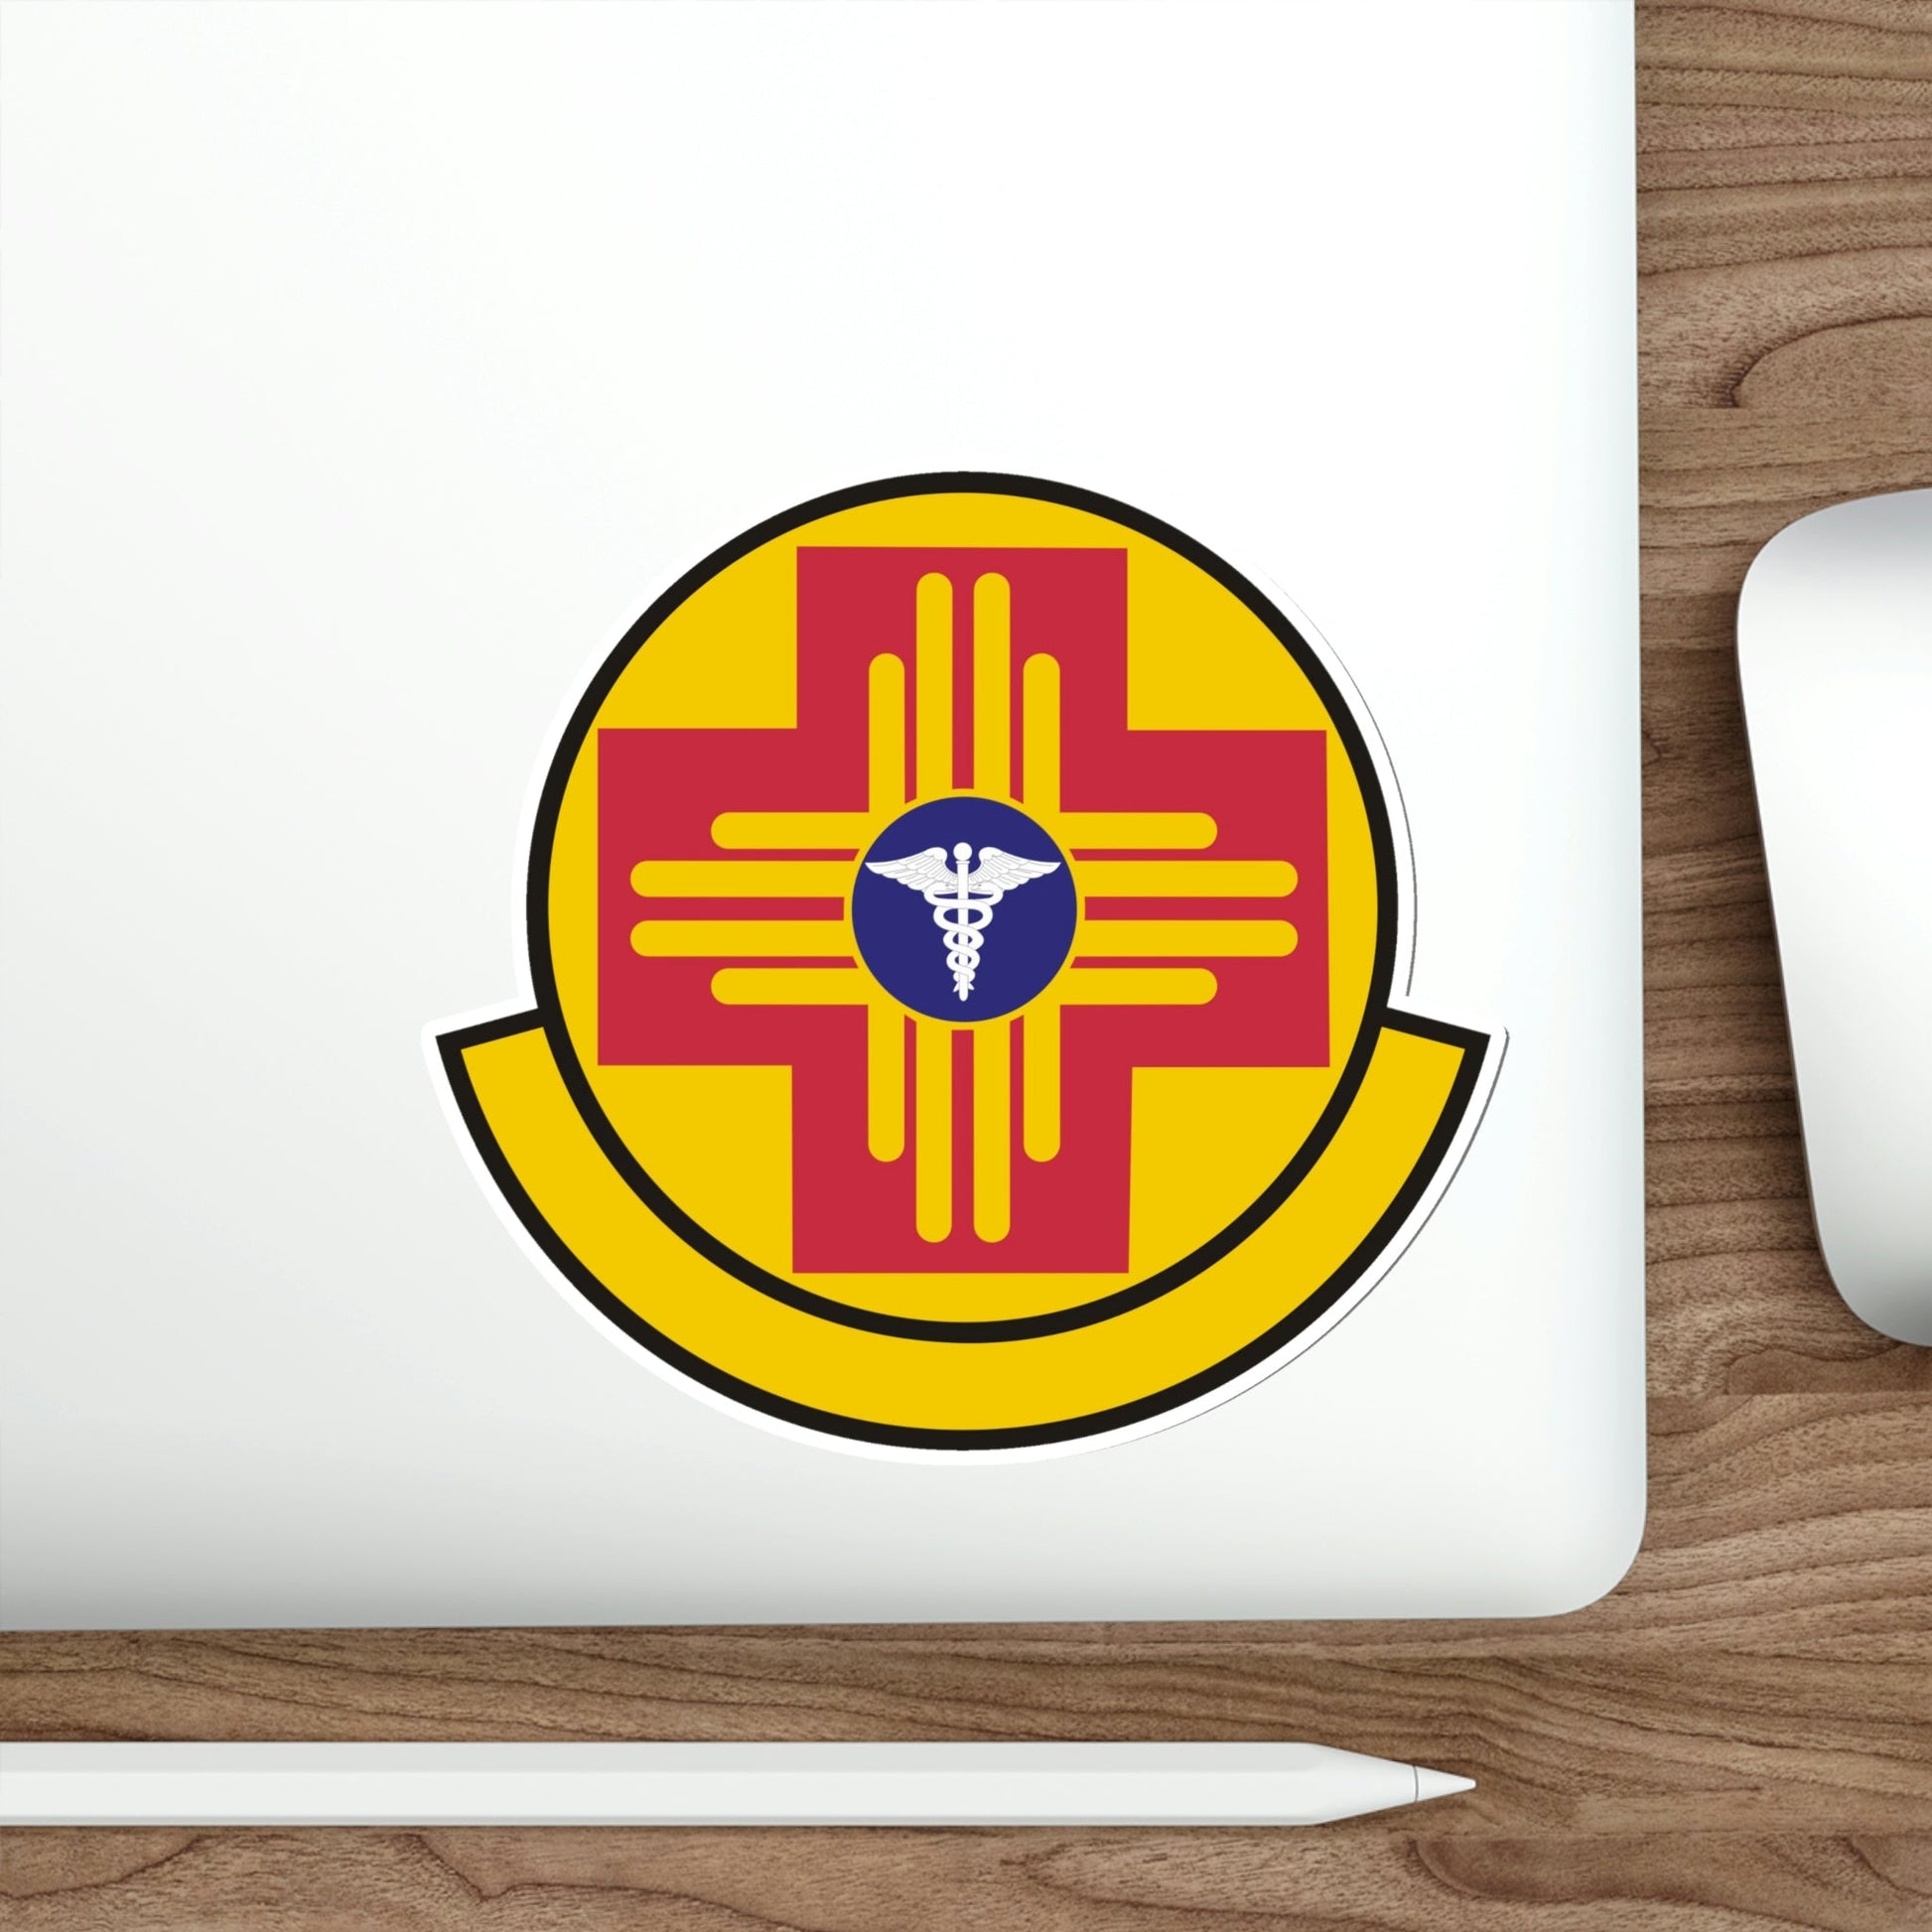 27 Special Operations Medical Readiness Squadron AFSOC (U.S. Air Force) STICKER Vinyl Die-Cut Decal-The Sticker Space